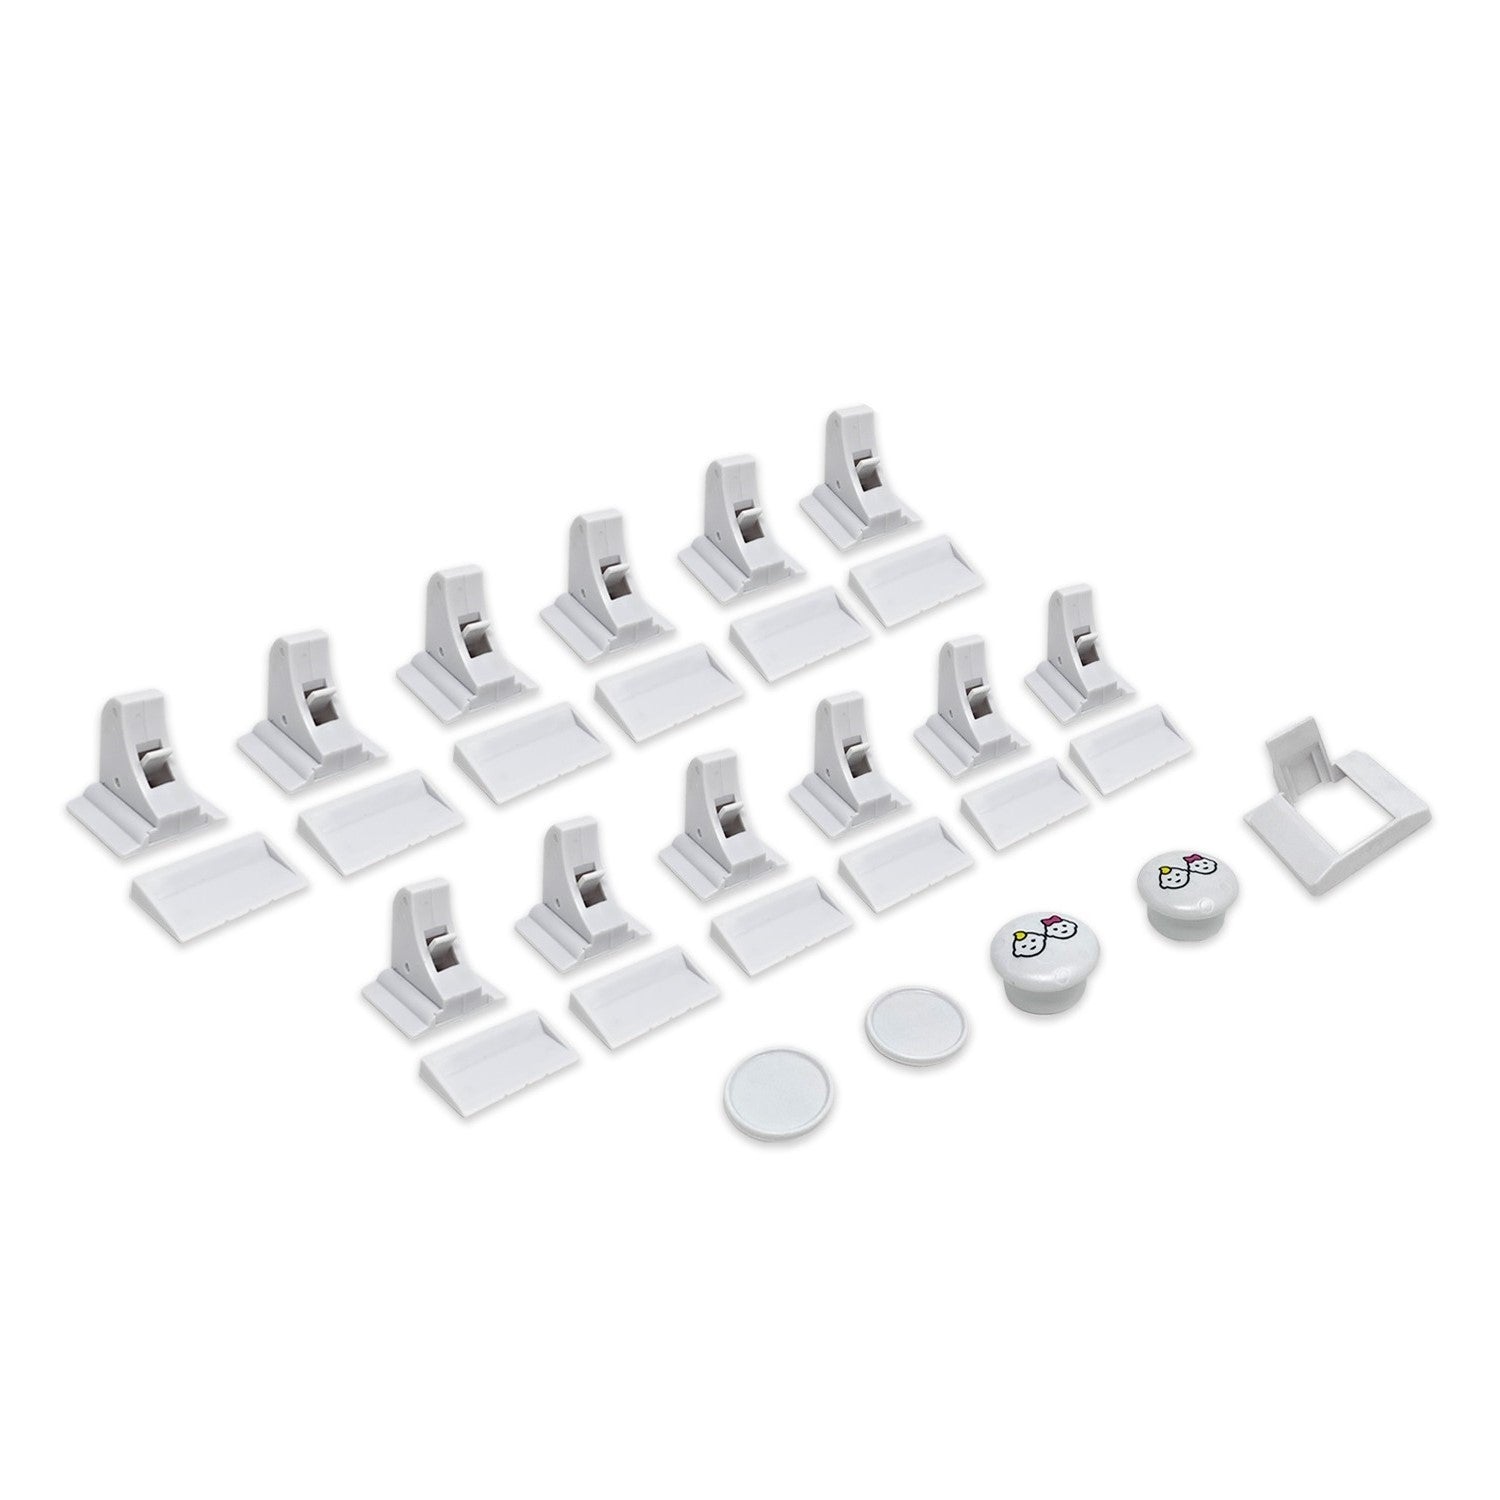 Magnetic Cabinet Locks (12 Locks + 2 Keys) with Adhesive, Easy Installation Tool - Child Proof Drawers - No Tools or Screws Needed - Jool Baby